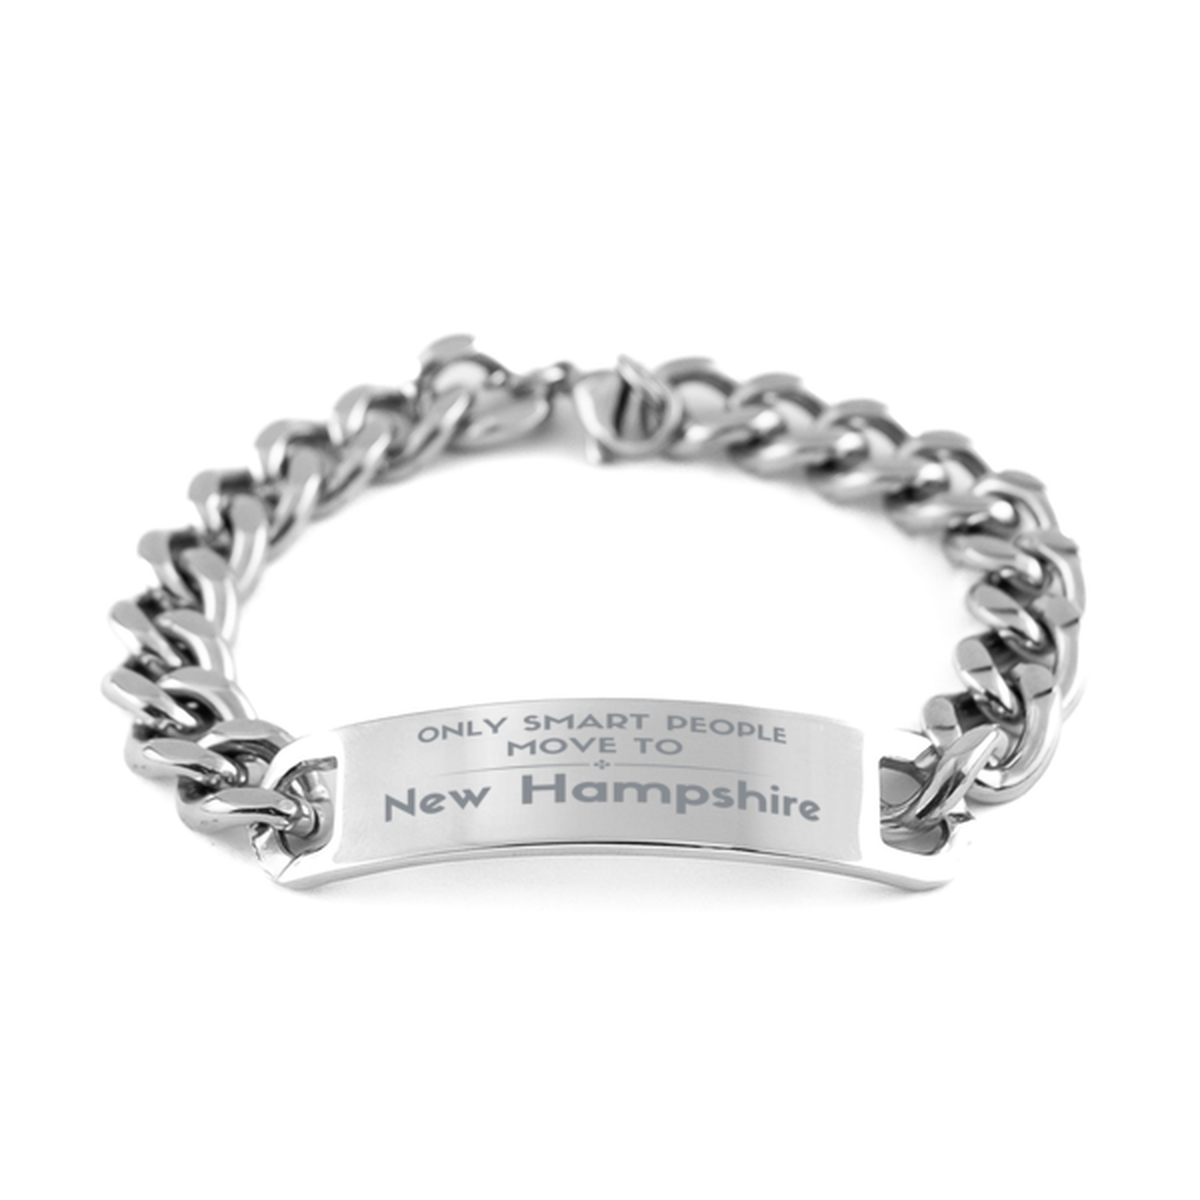 Only smart people move to New Hampshire Cuban Chain Stainless Steel Bracelet, Gag Gifts For New Hampshire, Move to New Hampshire Gifts for Friends Coworker Funny Saying Quote